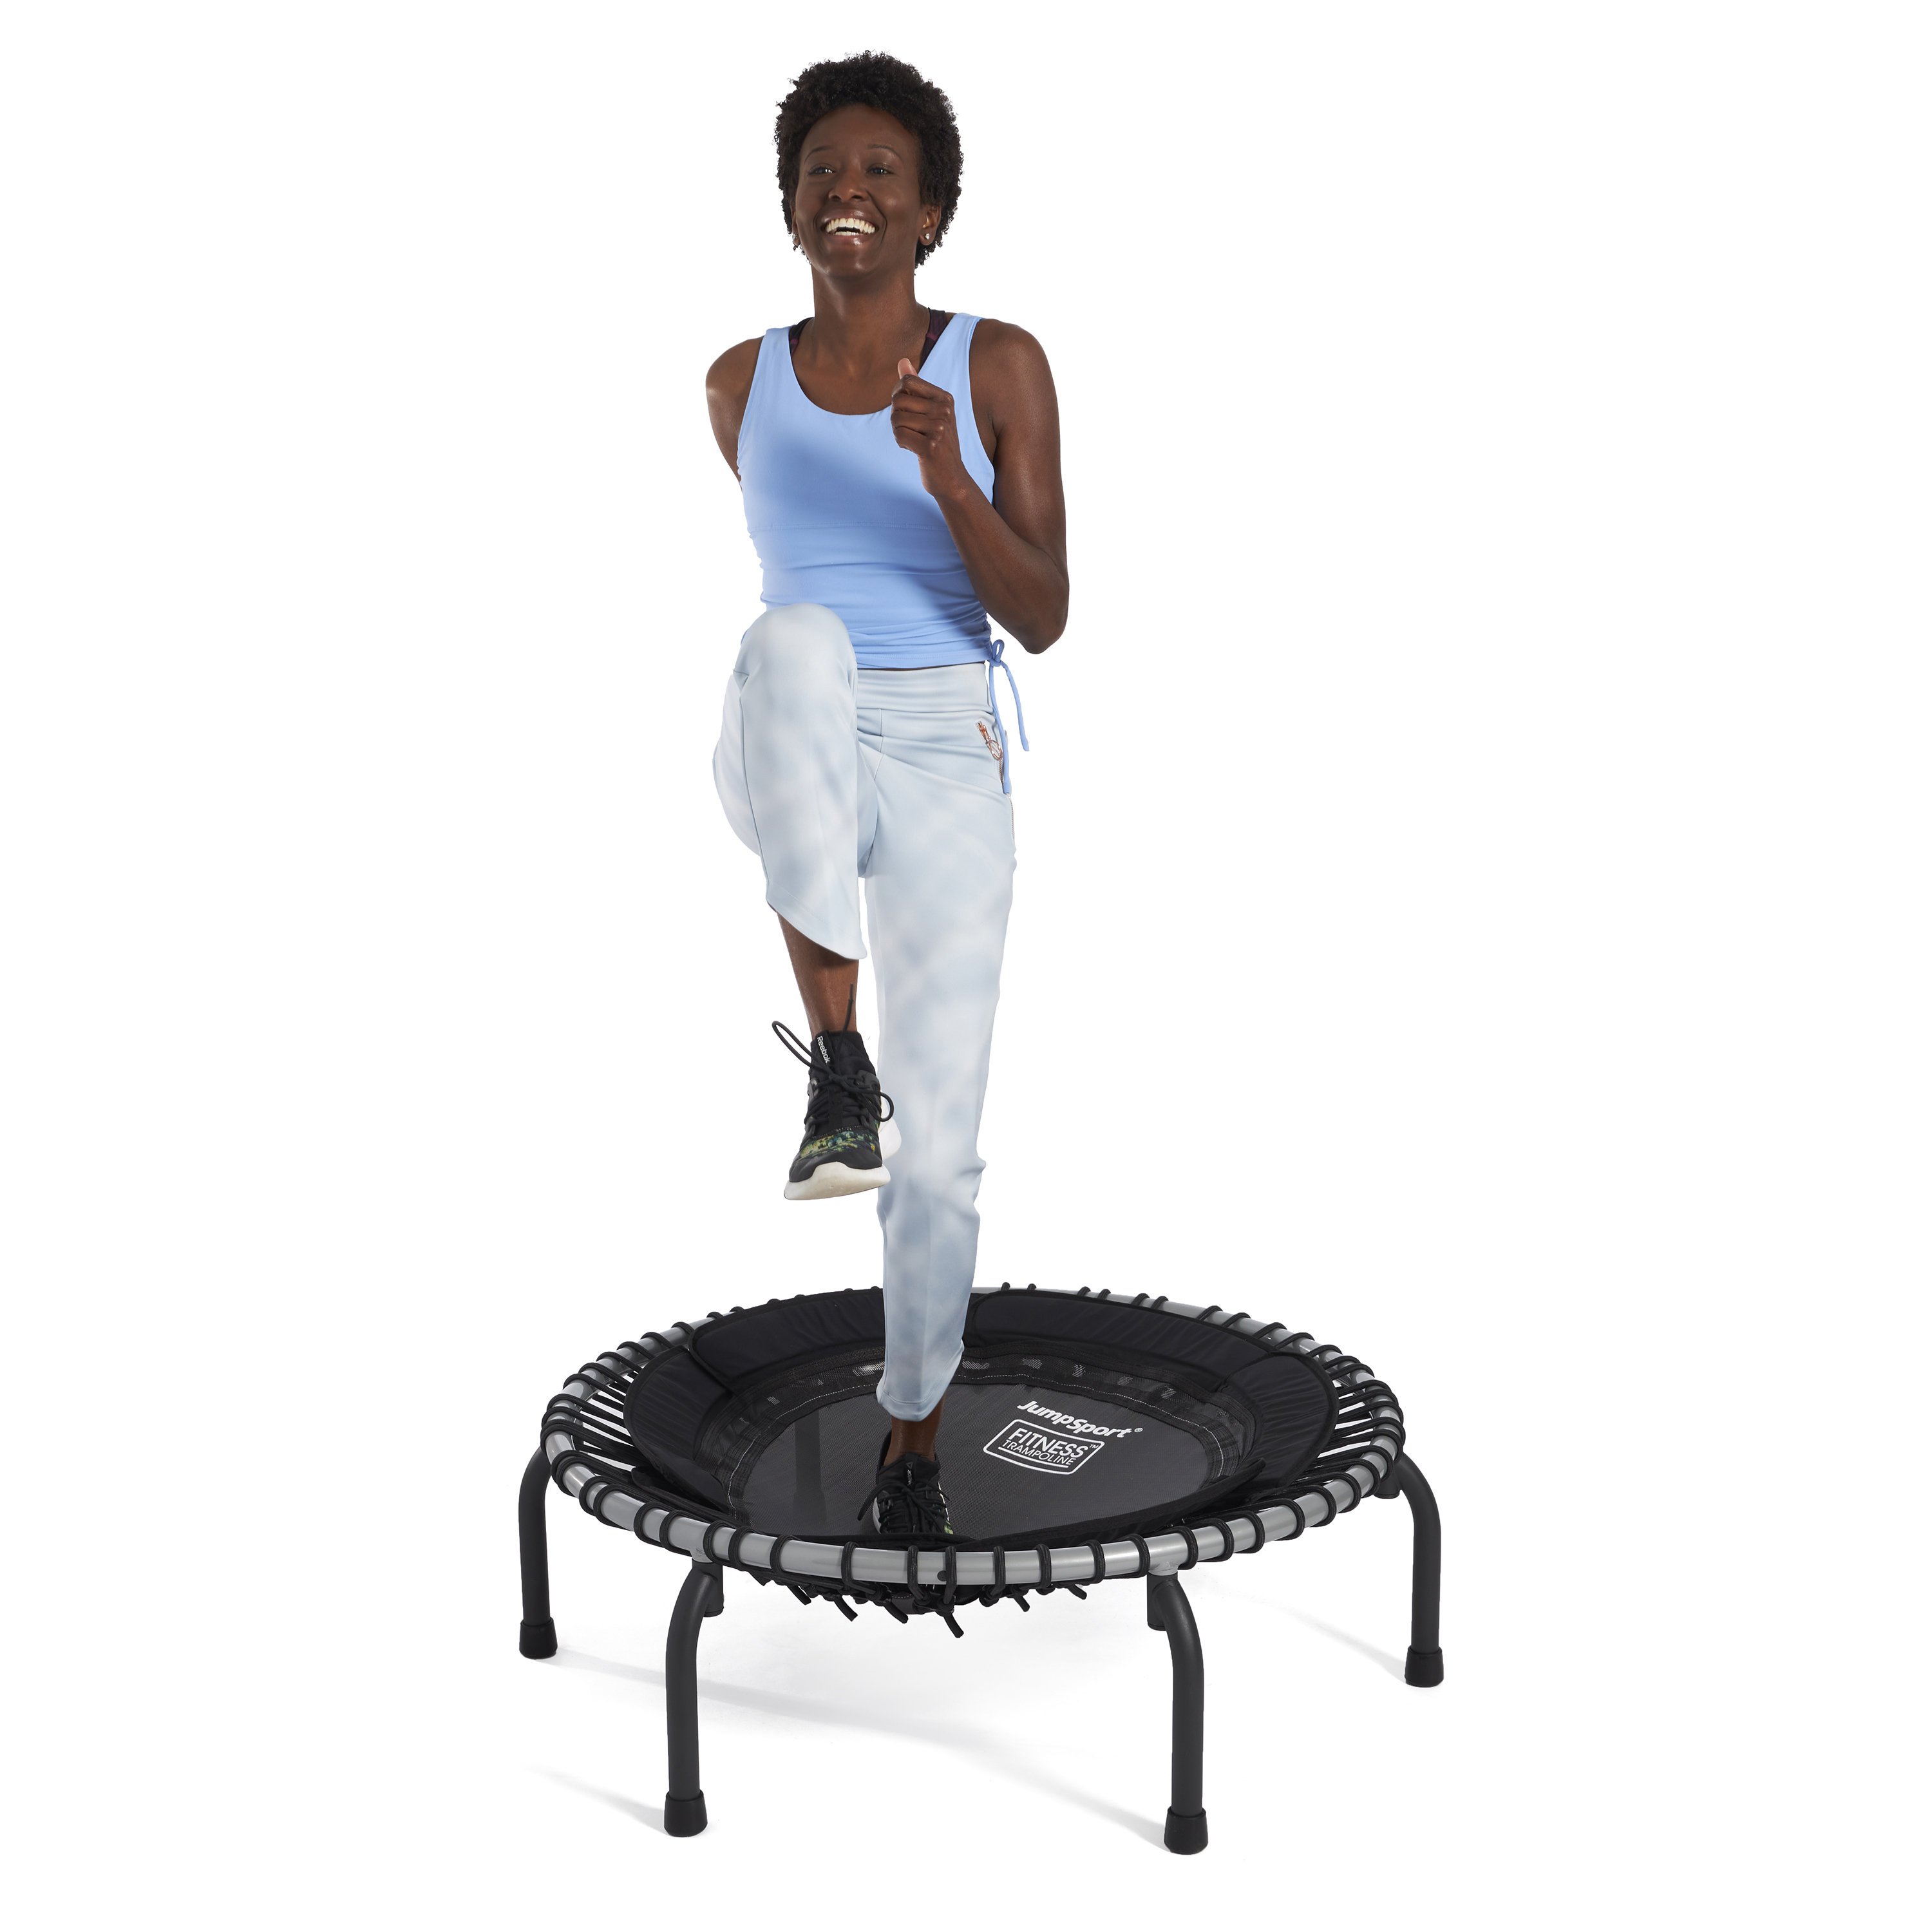 How to Upgrade a JumpSport Fitness Trampoline